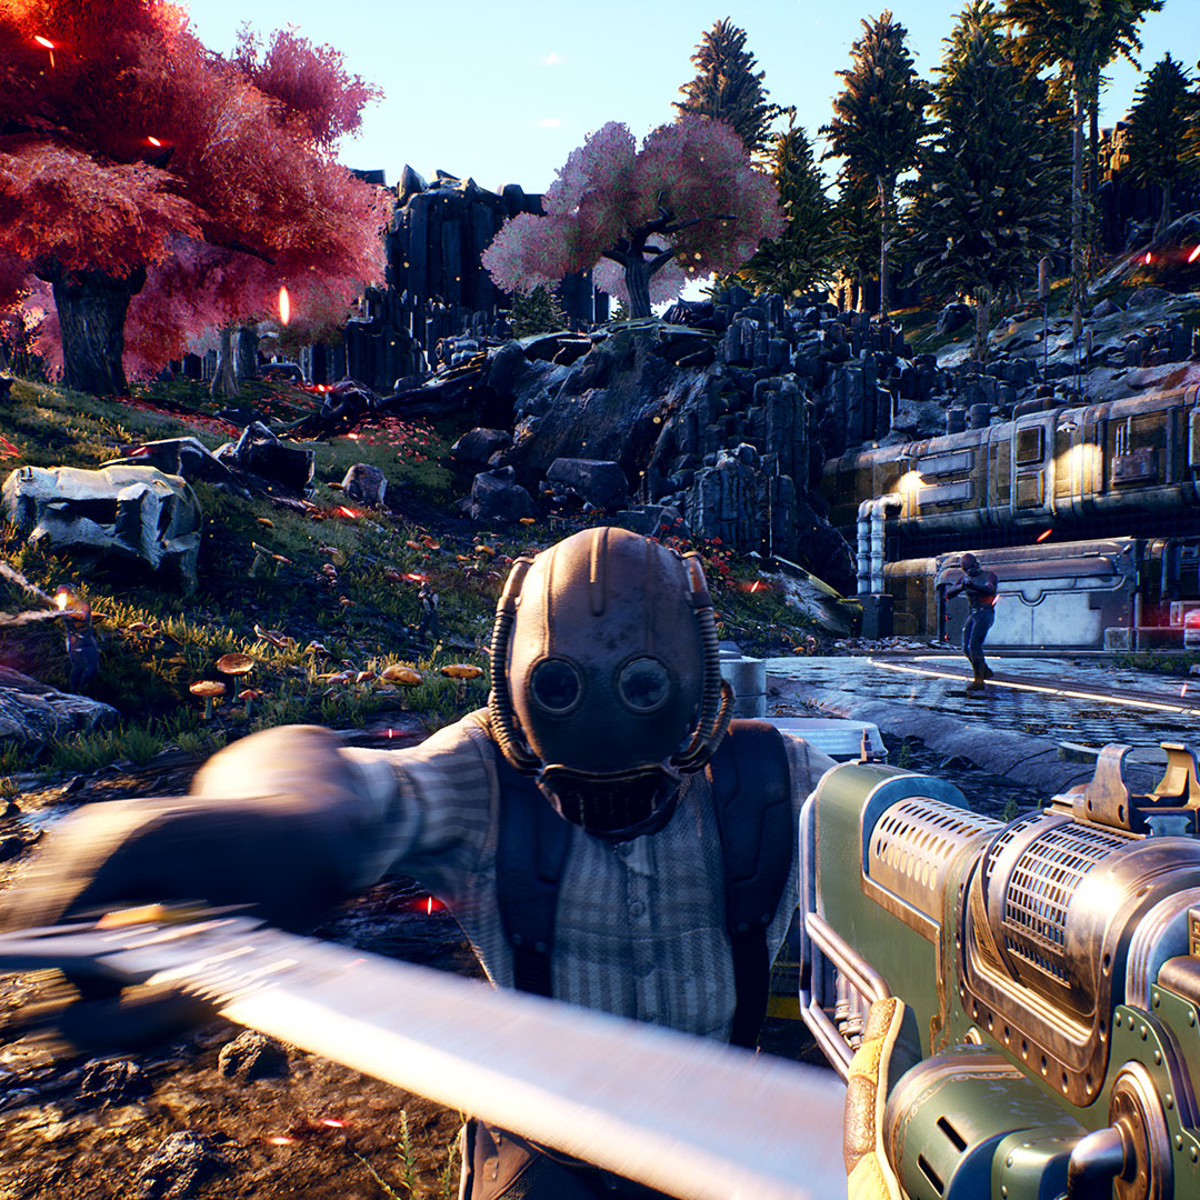 Here's 20 minutes of The Outer Worlds gameplay, showcasing its janky  Obsidian charm